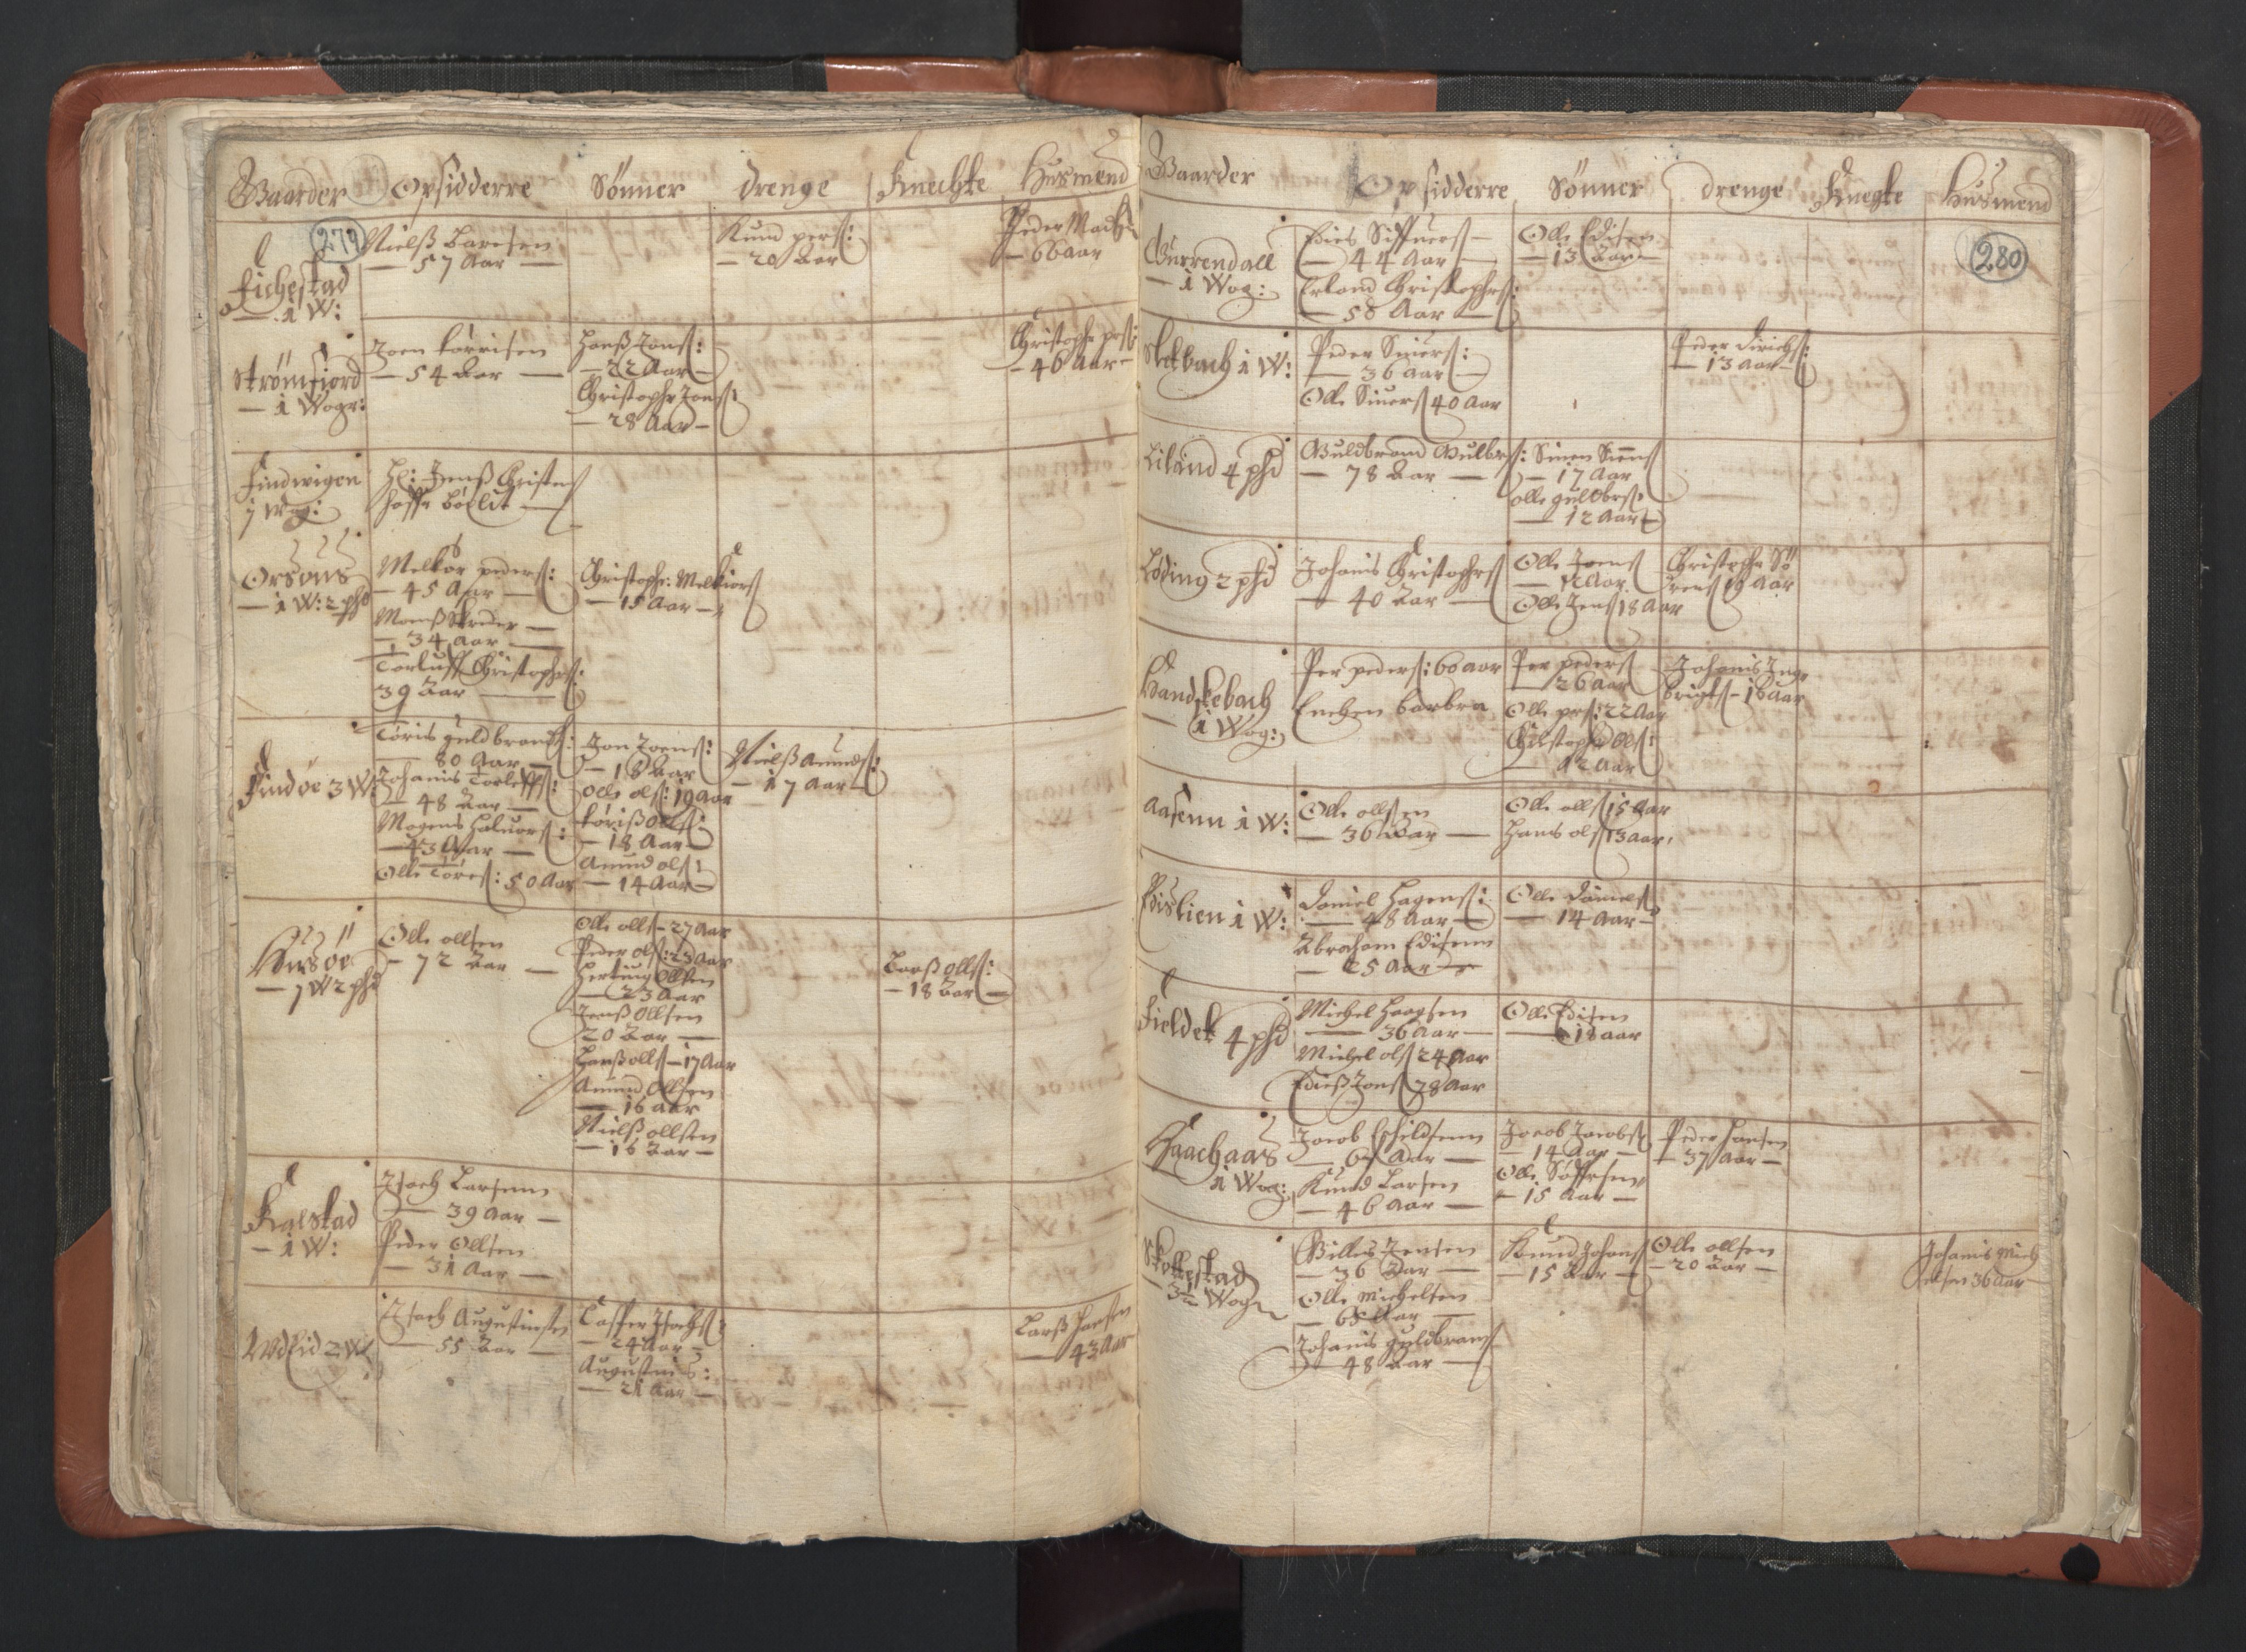 RA, Vicar's Census 1664-1666, no. 35: Helgeland deanery and Salten deanery, 1664-1666, p. 279-280